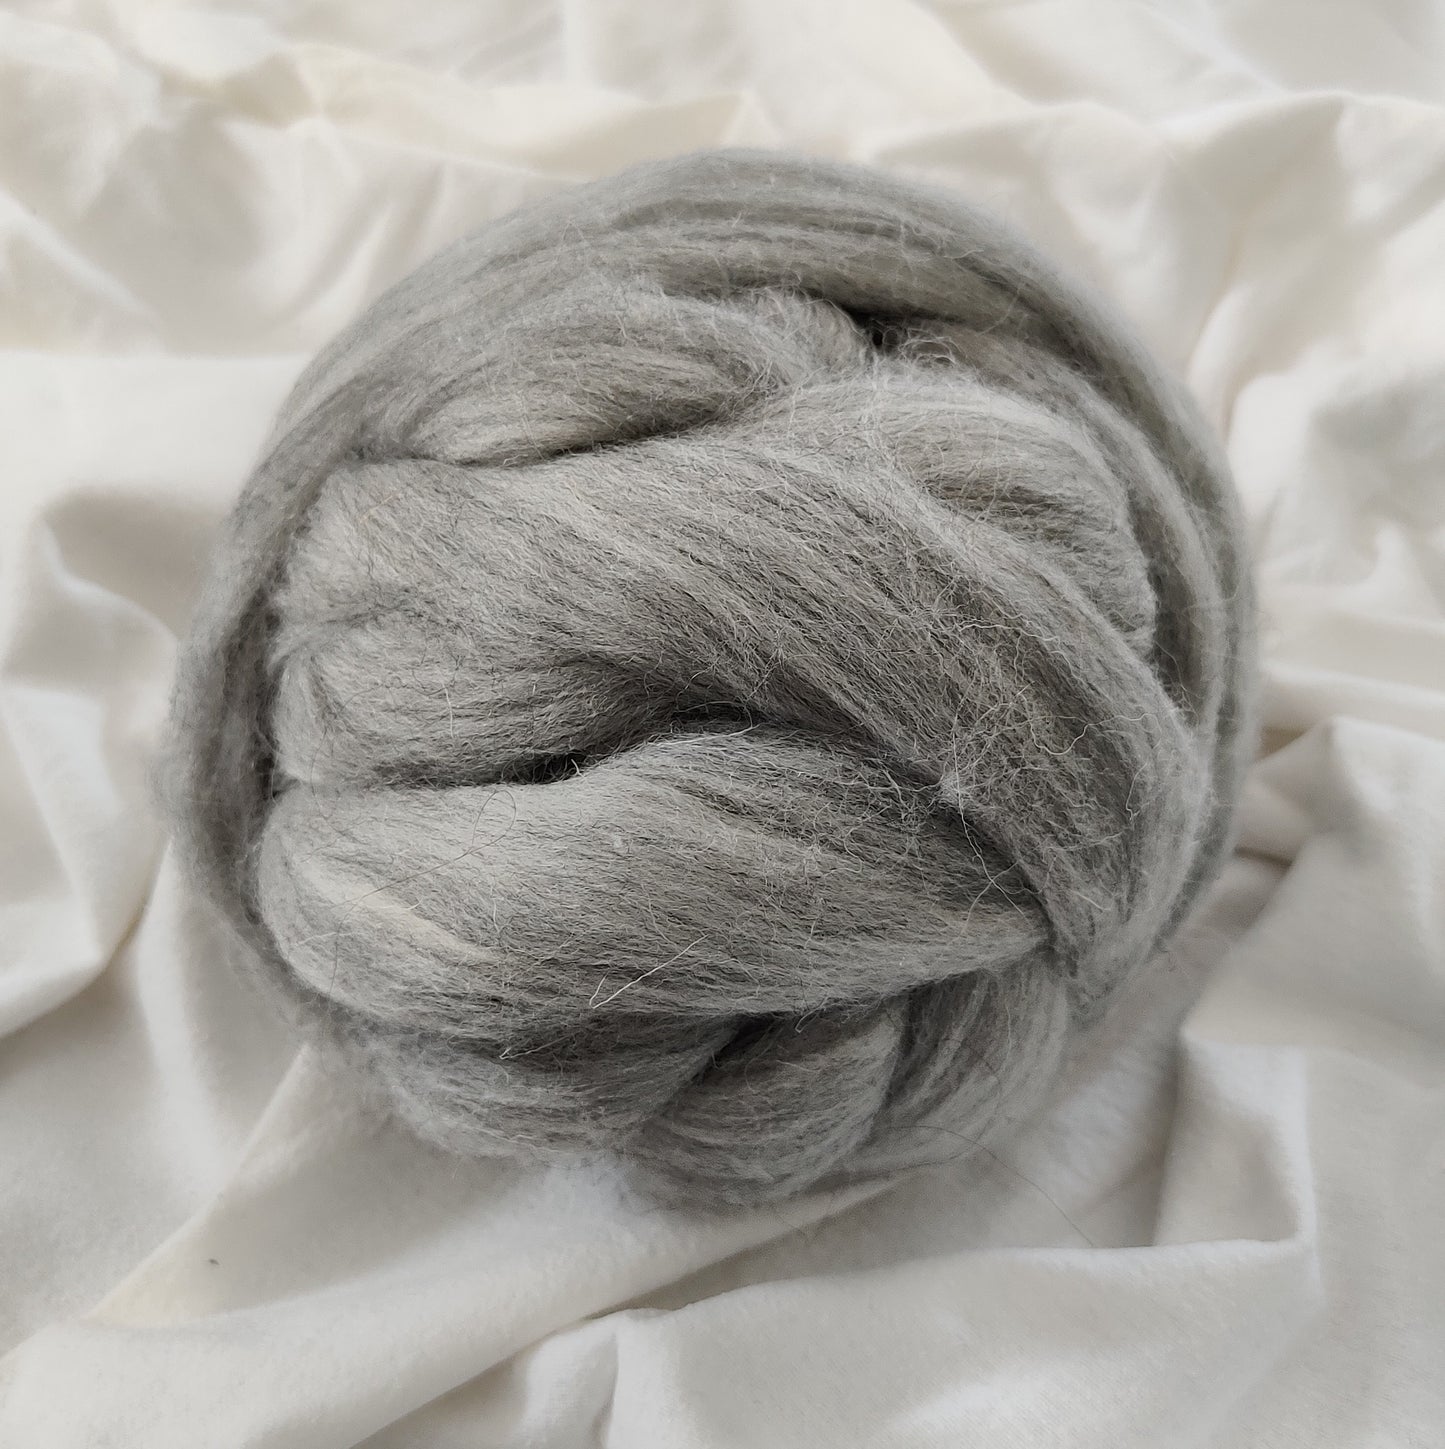 Instructions and merino wool yarn for the ONNI baby nest